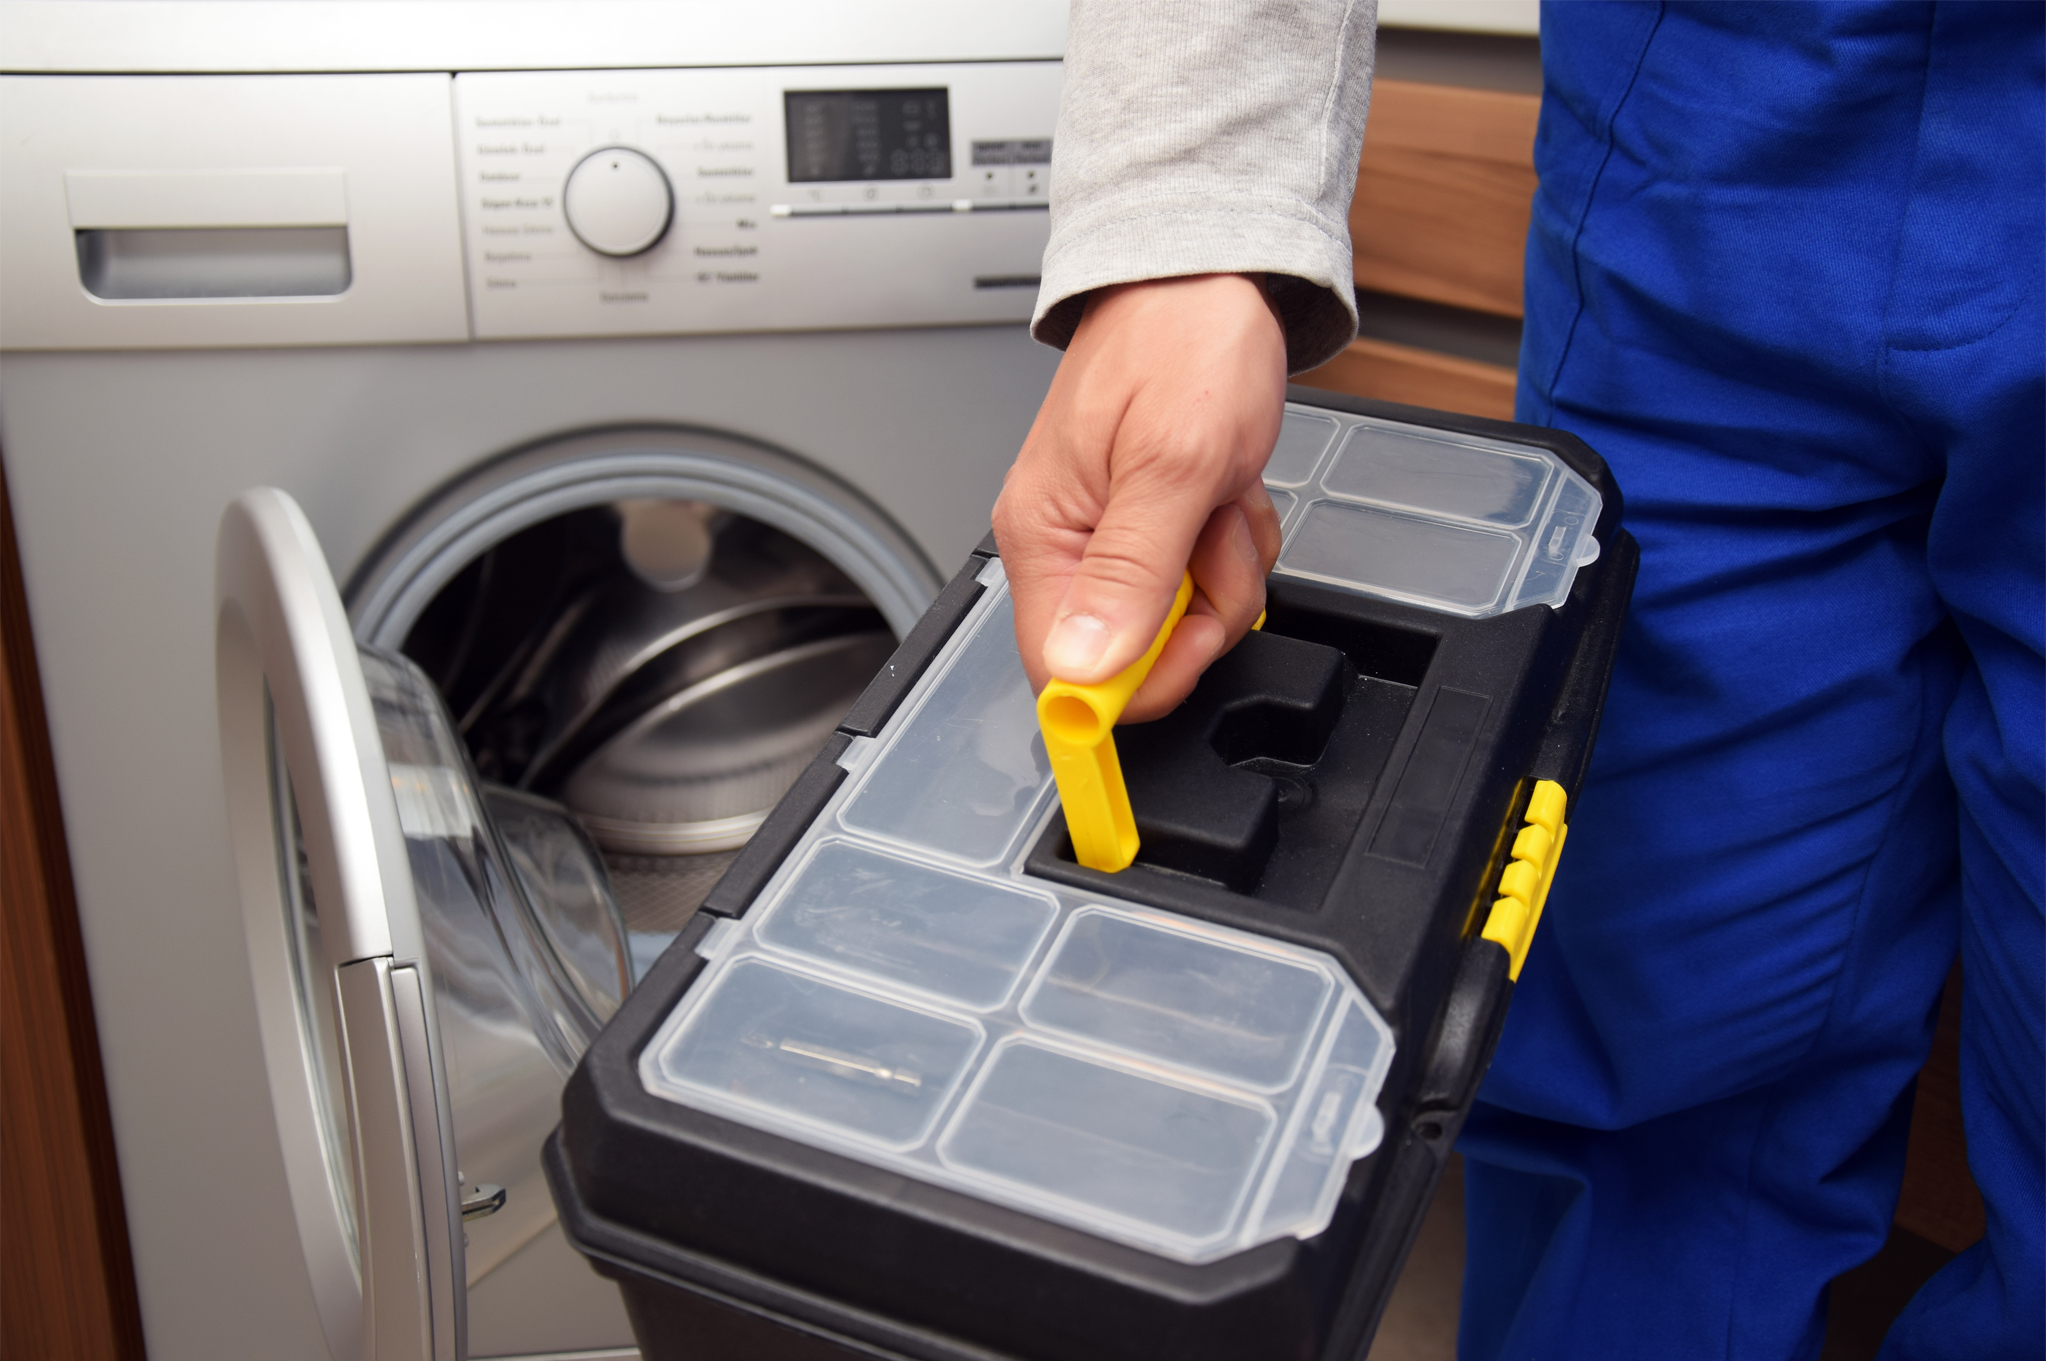 Appliance repair technician holding toolbox in front of washing machine